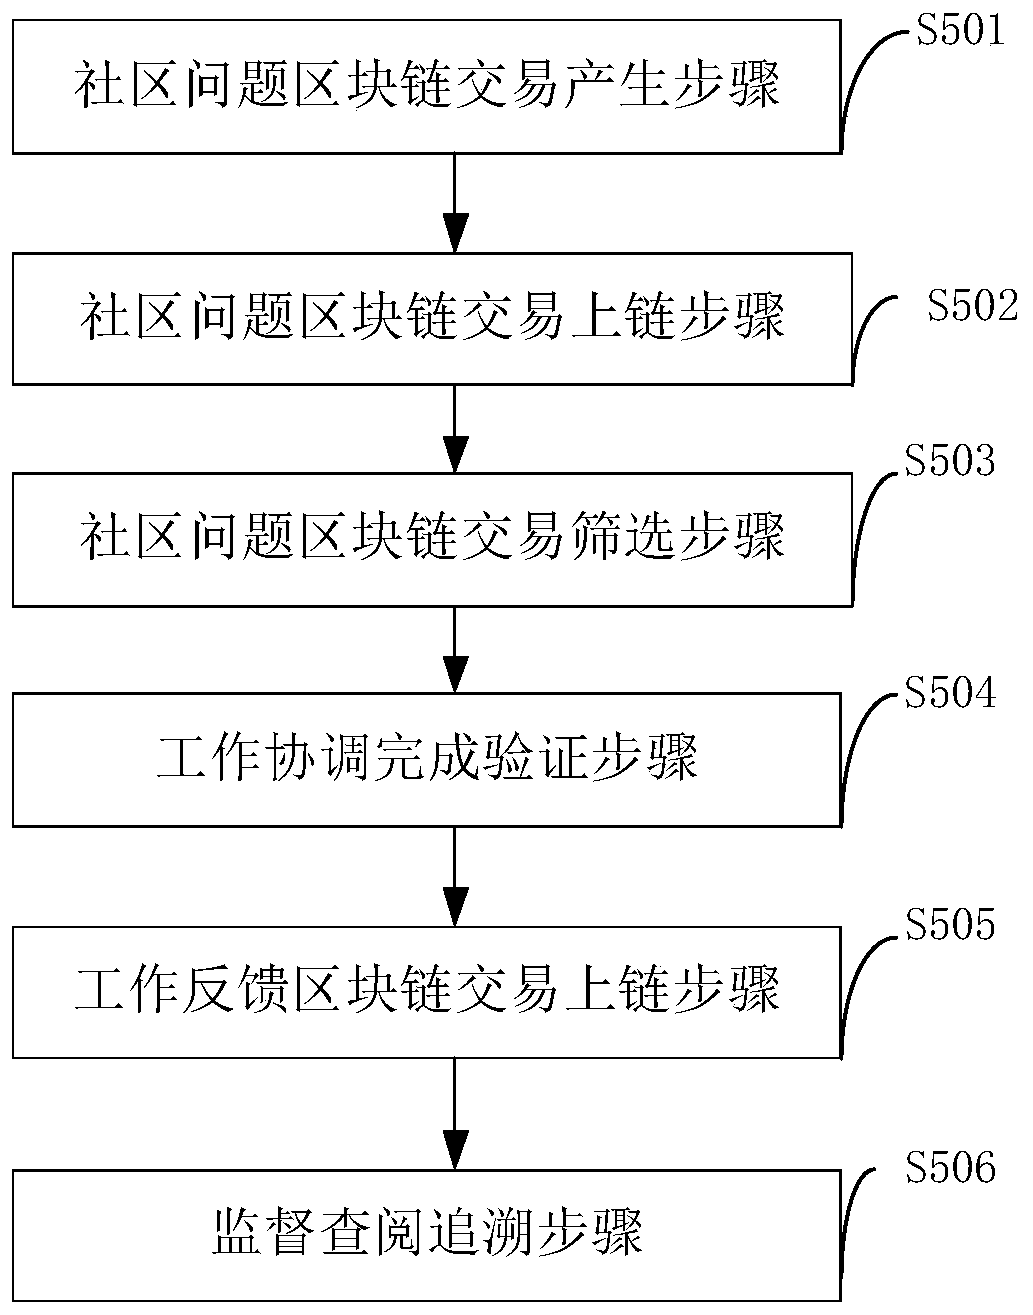 Community problem multi-department cooperative processing system and method based on block chain